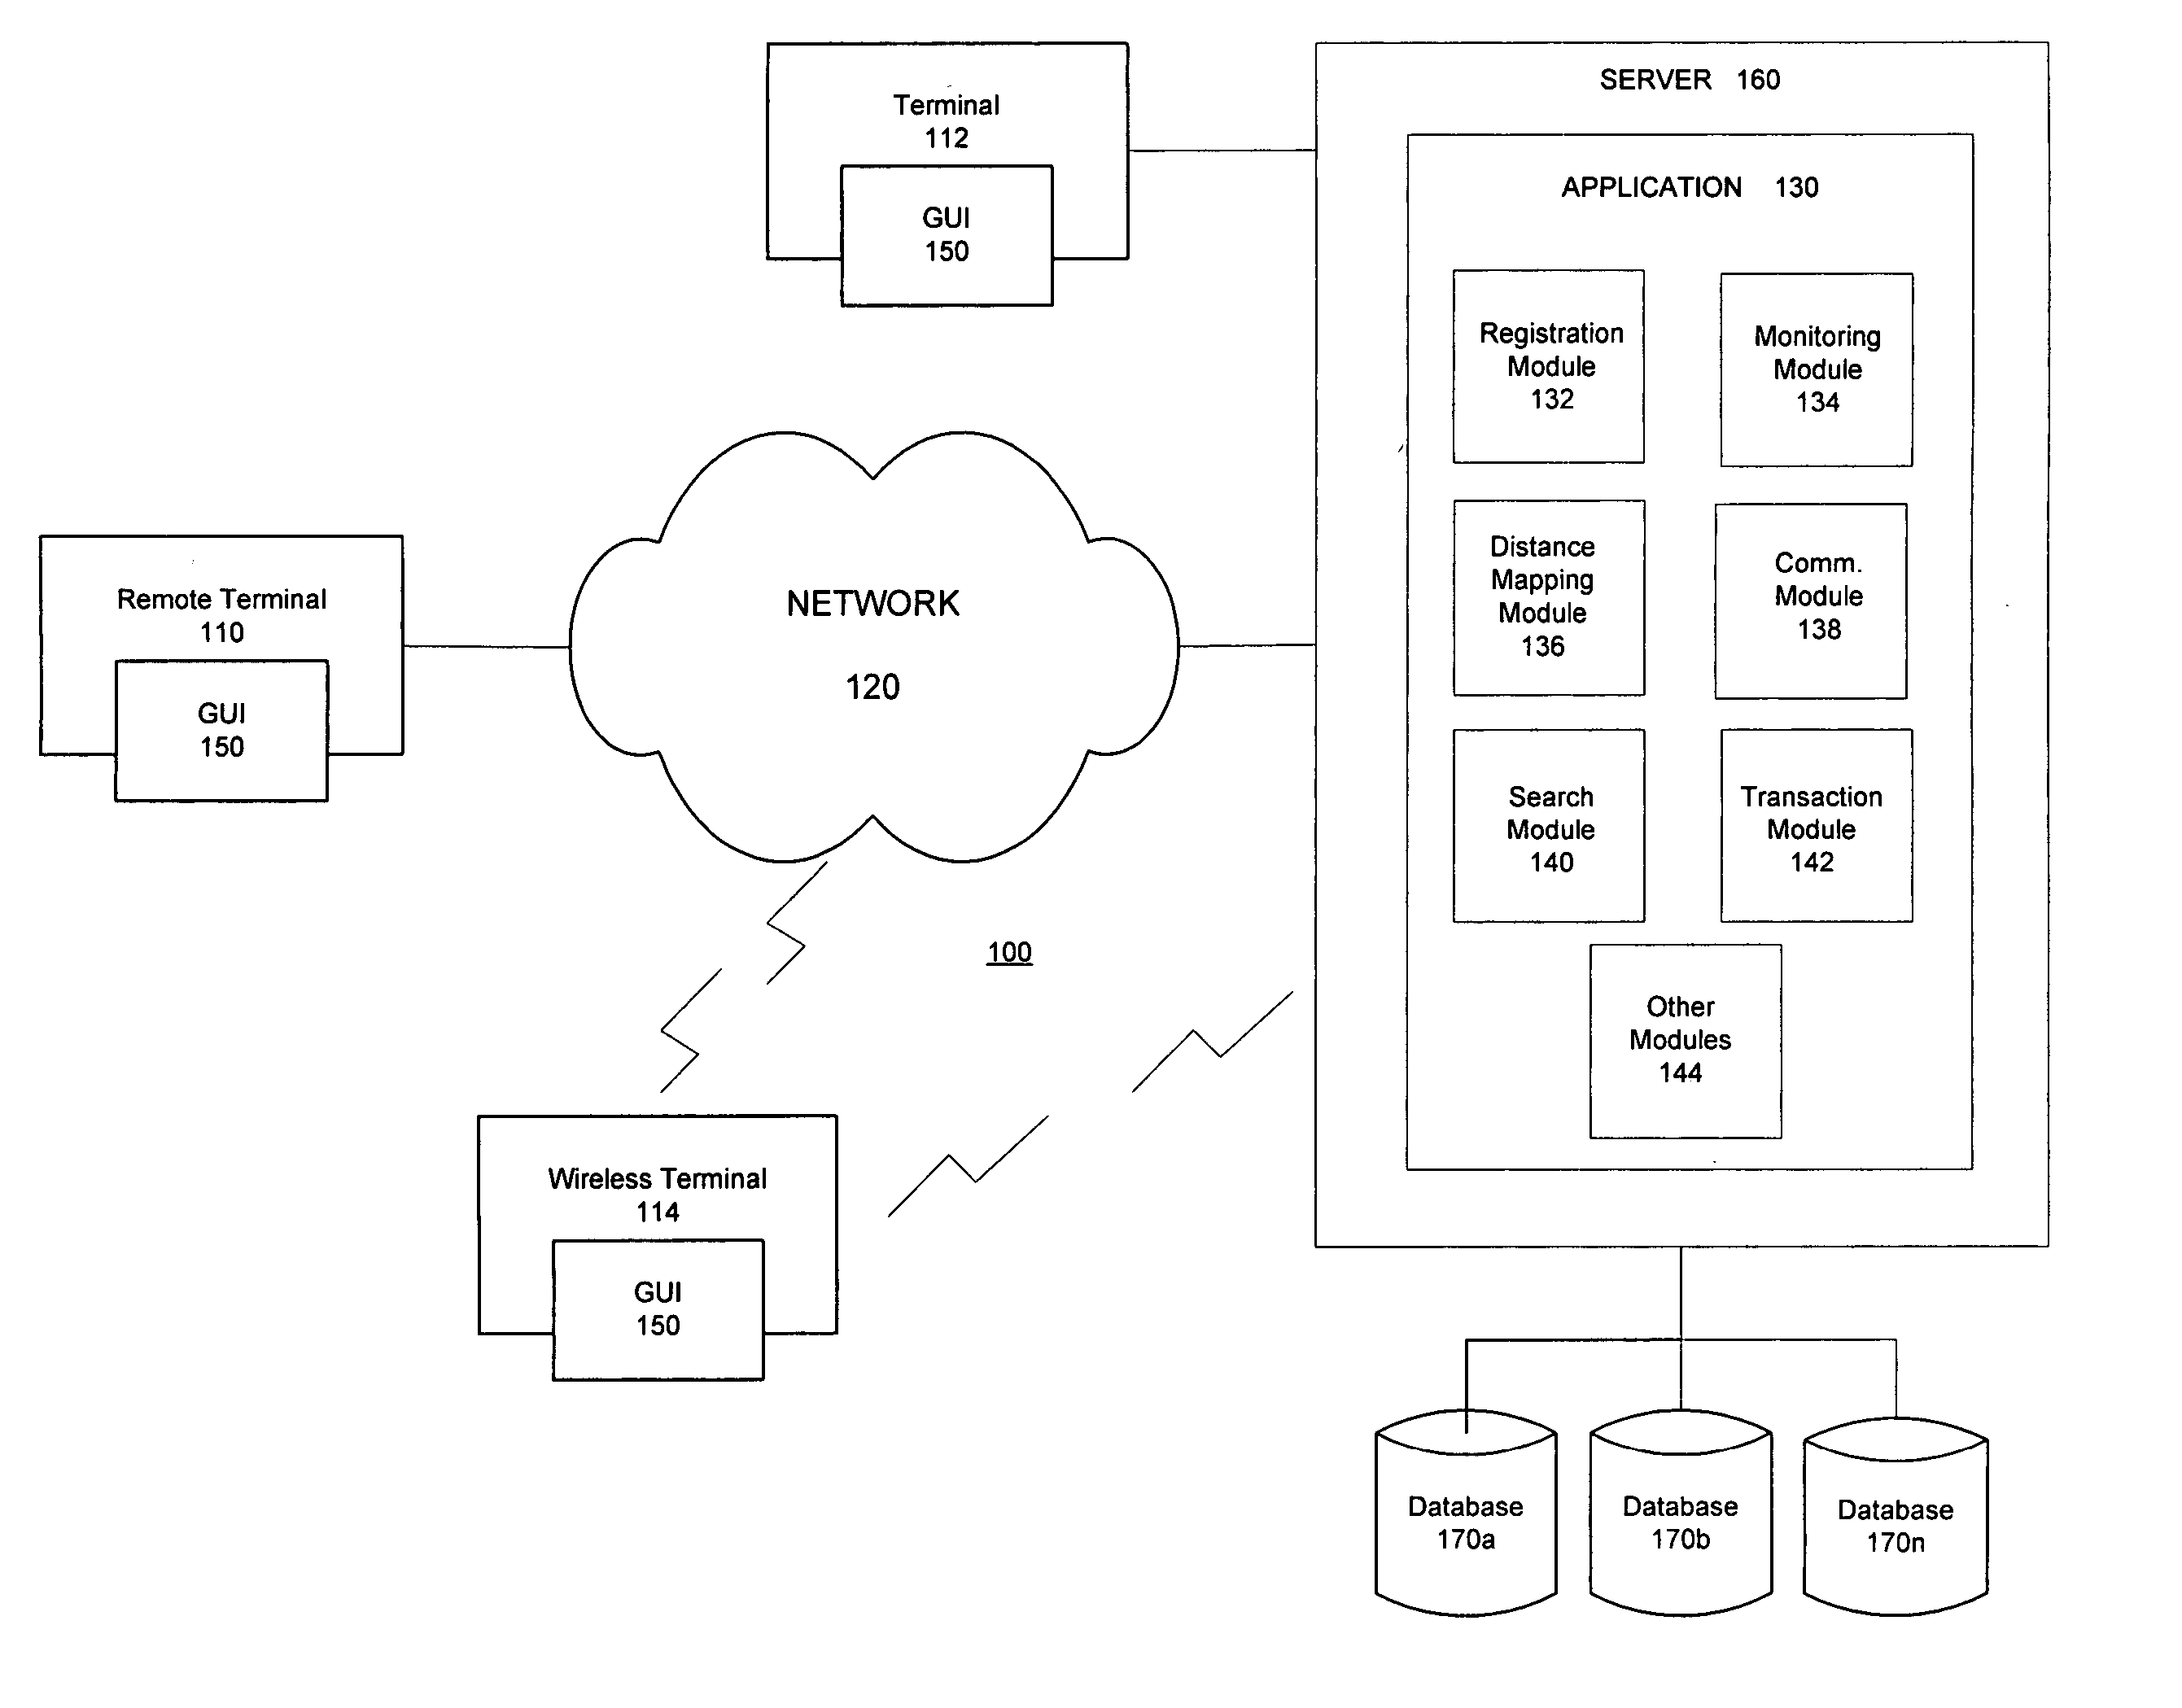 System and method for enabling identification of network users having similar interests and facilitating communication between them